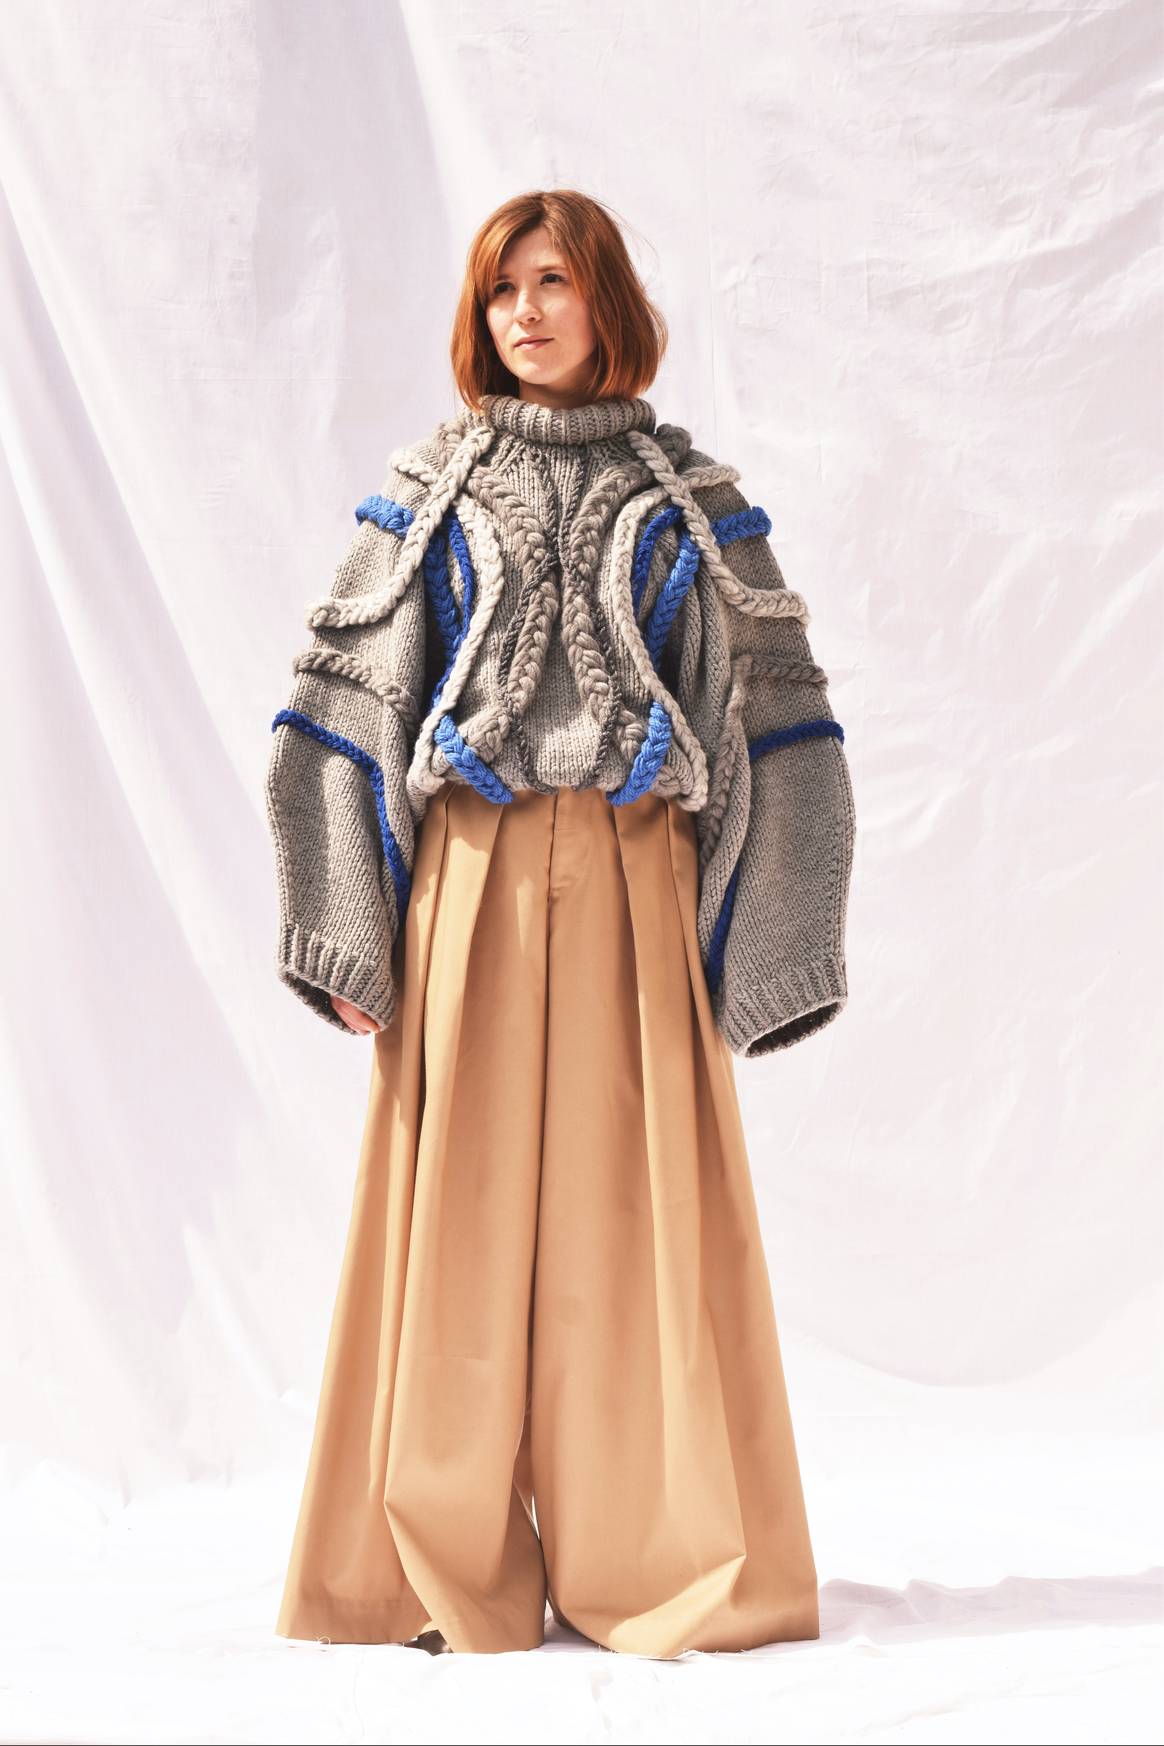 Looks by Kingston School of Art 2022 fashion graduate and GFW22 Amelia Dyer, courtesy of the school.